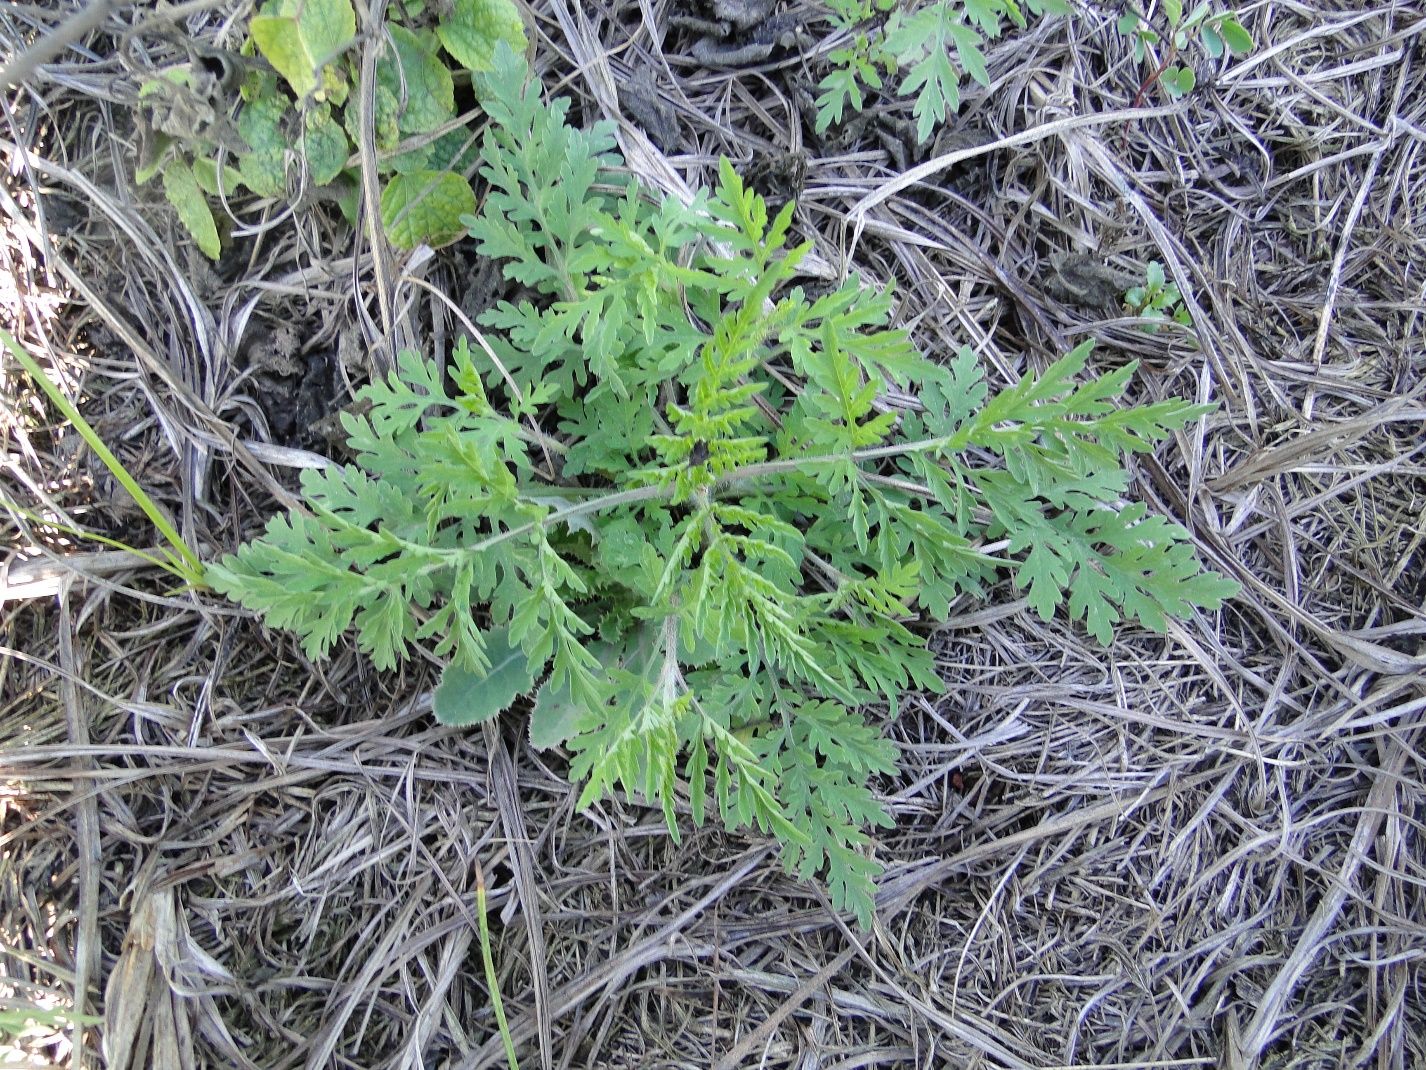 Ragweed parthenium rosette prior to the bolting stage.